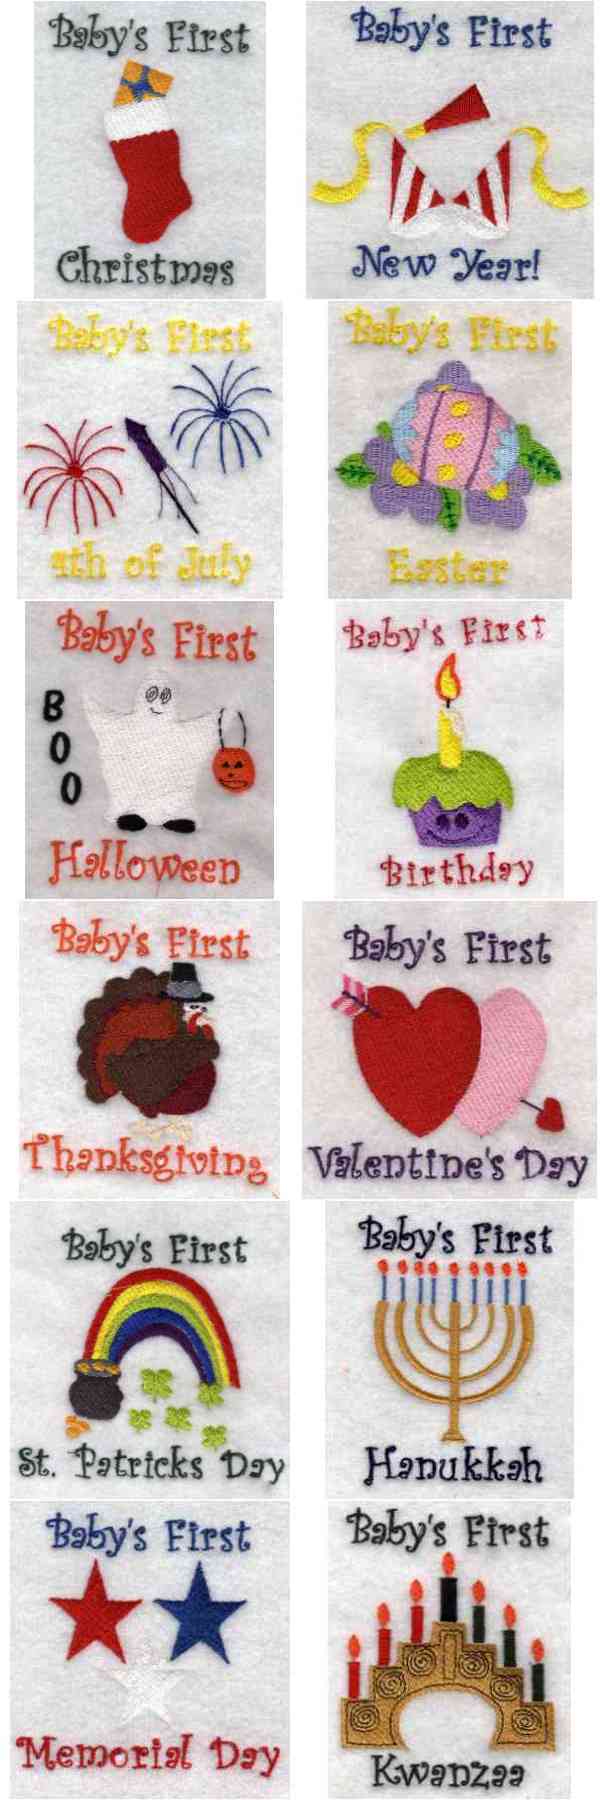 Babies First Embroidery Machine Design Details